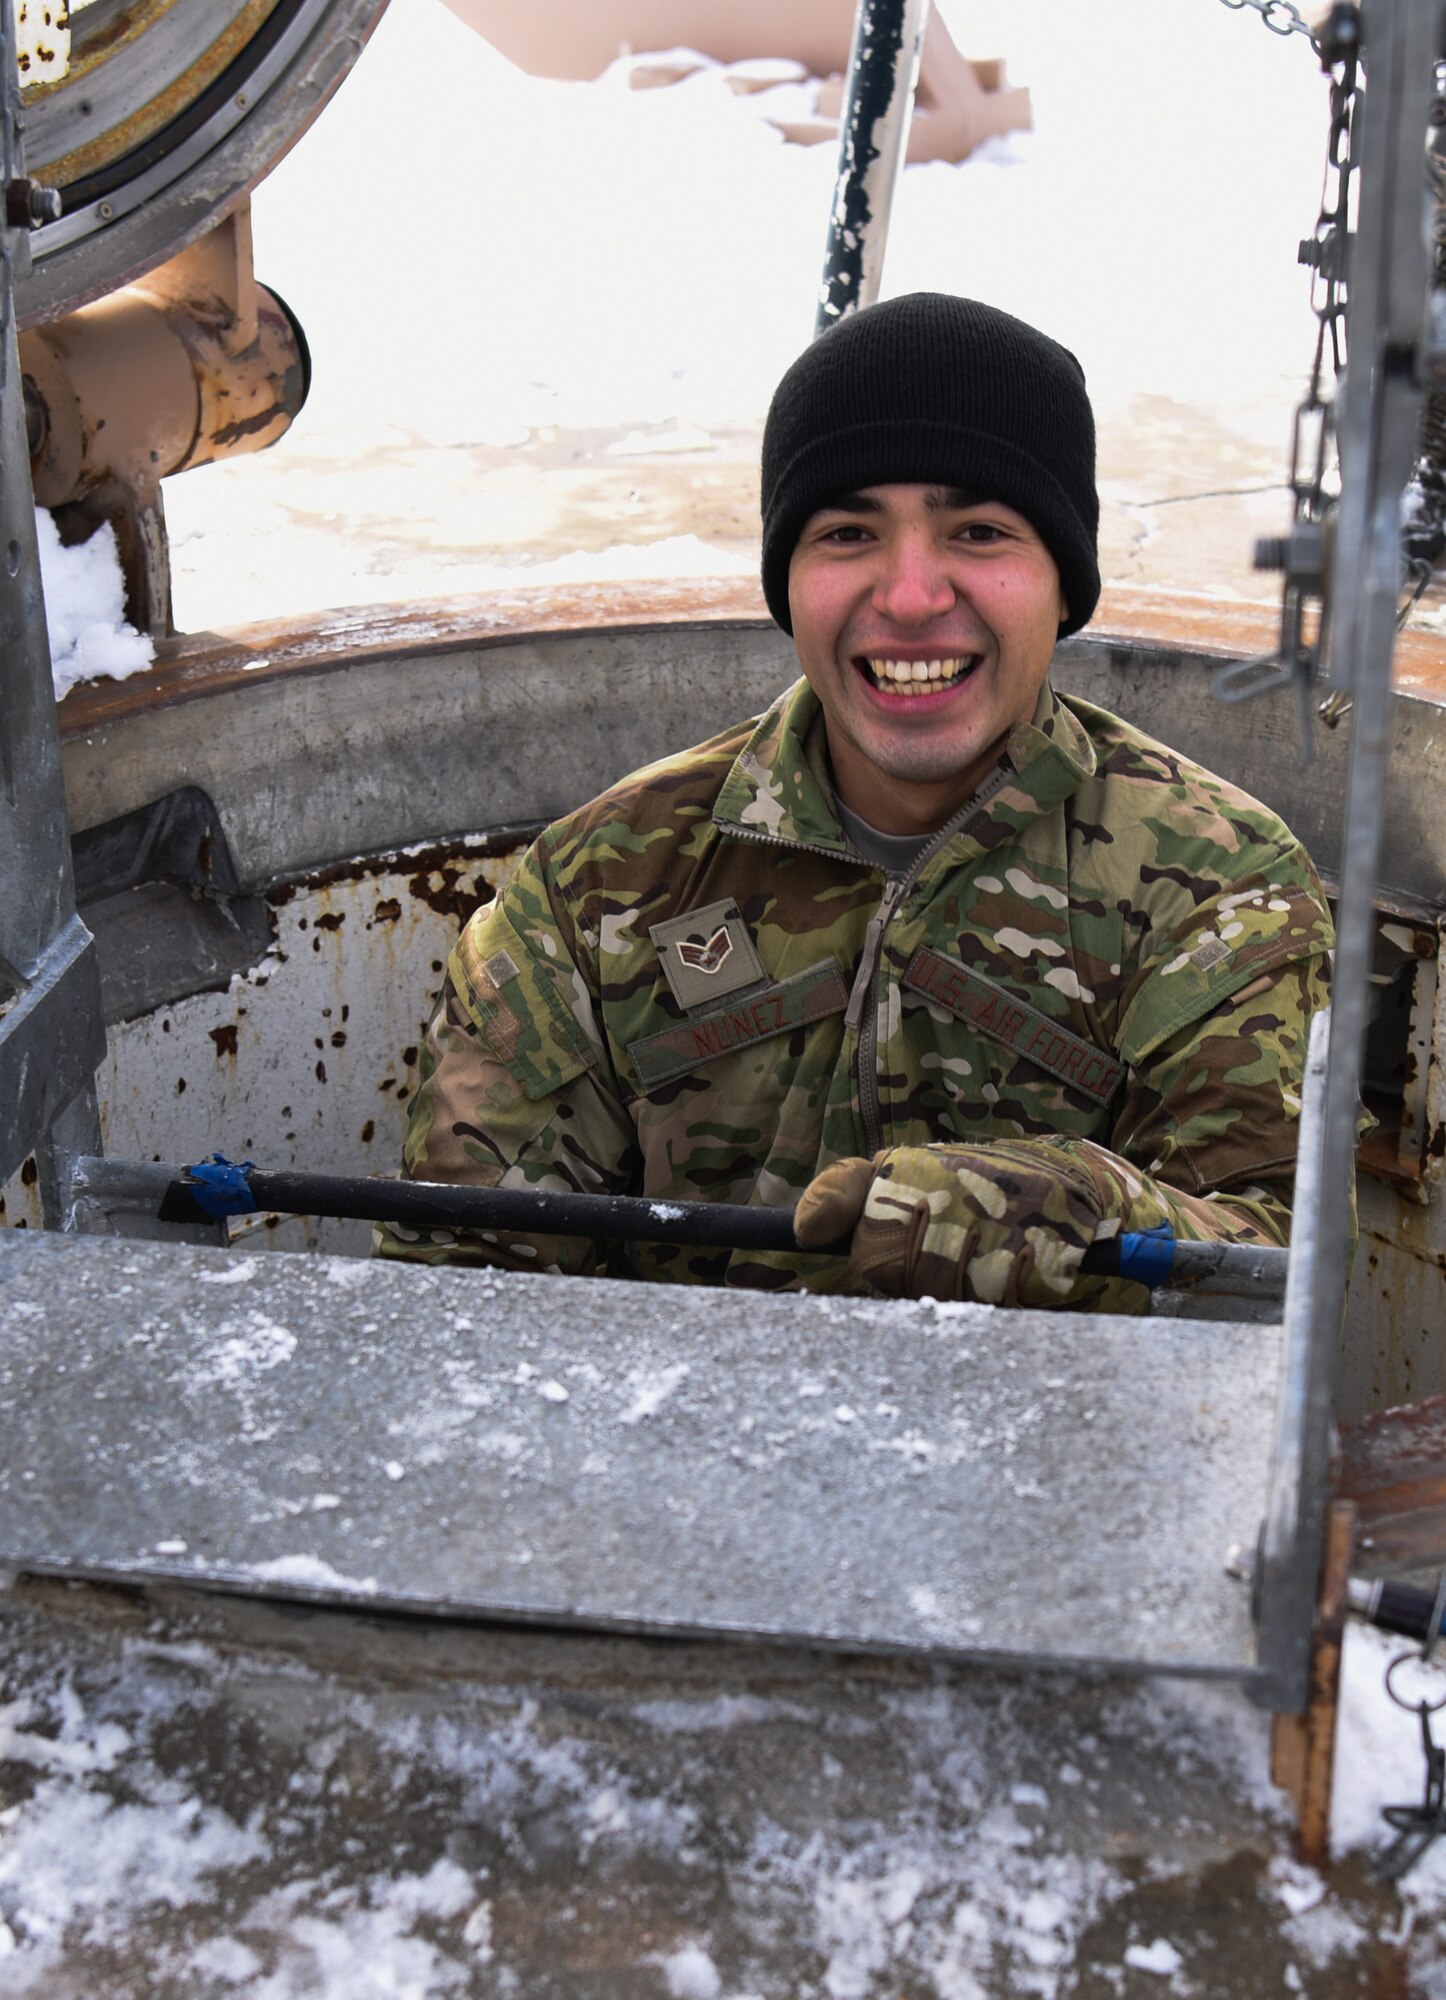 Senior Airman Dereck Nunez, 90th Missile Security Forces flight security controller, smiles for the camera while descending a ladder in the F.E. Warren Air Force Base missile complex, Dec. 28, 2017. Members of the 90th Missile Security Forces Squadron got the chance to go into a missile launch facility to see what they protect every day.